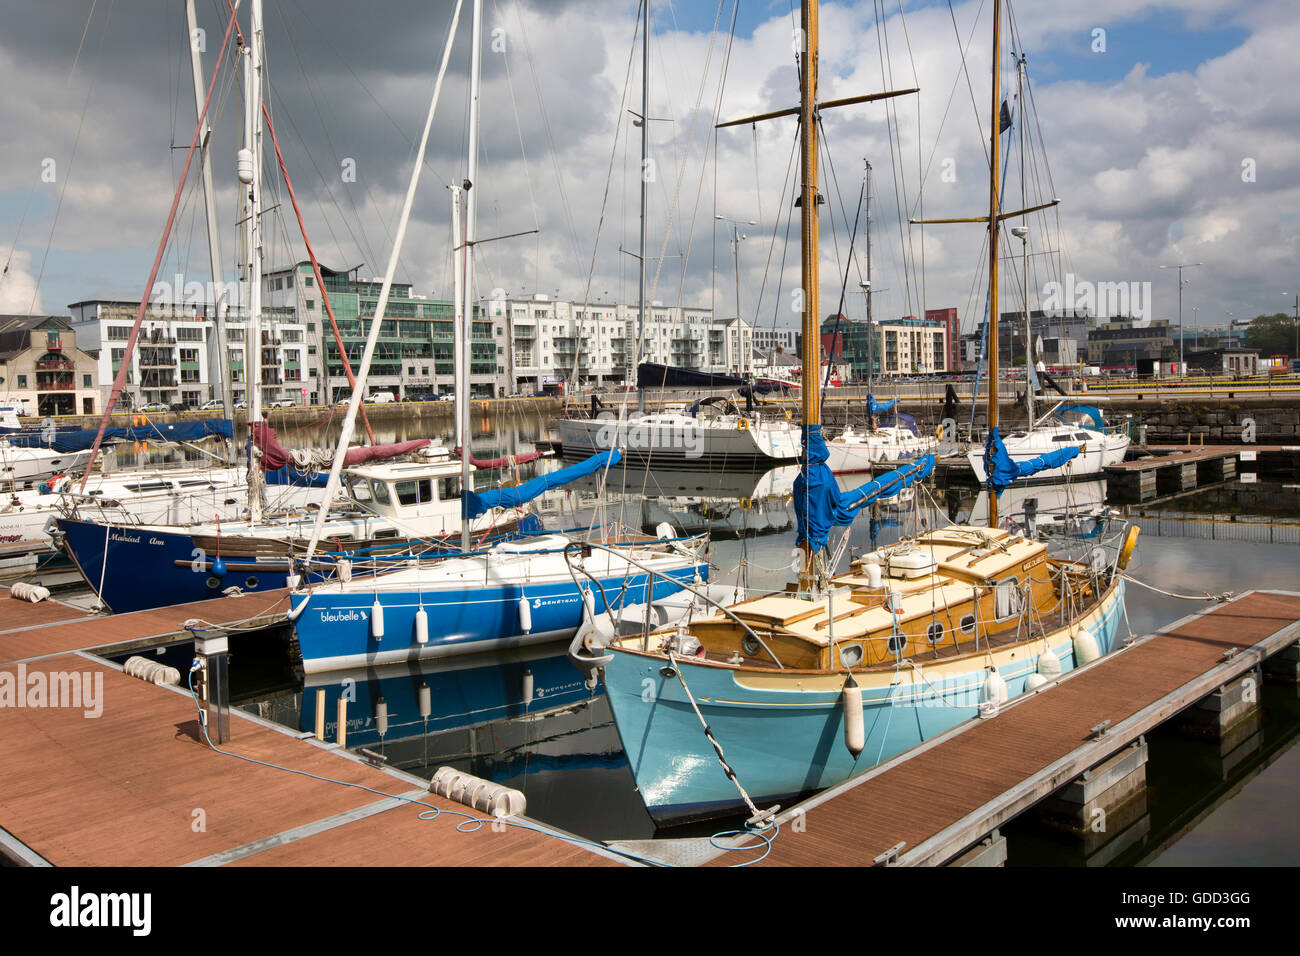 Ireland, Co Galway, Galway, New Dock Road, Dock No 1, sailing boats at leisure moorings Stock Photo